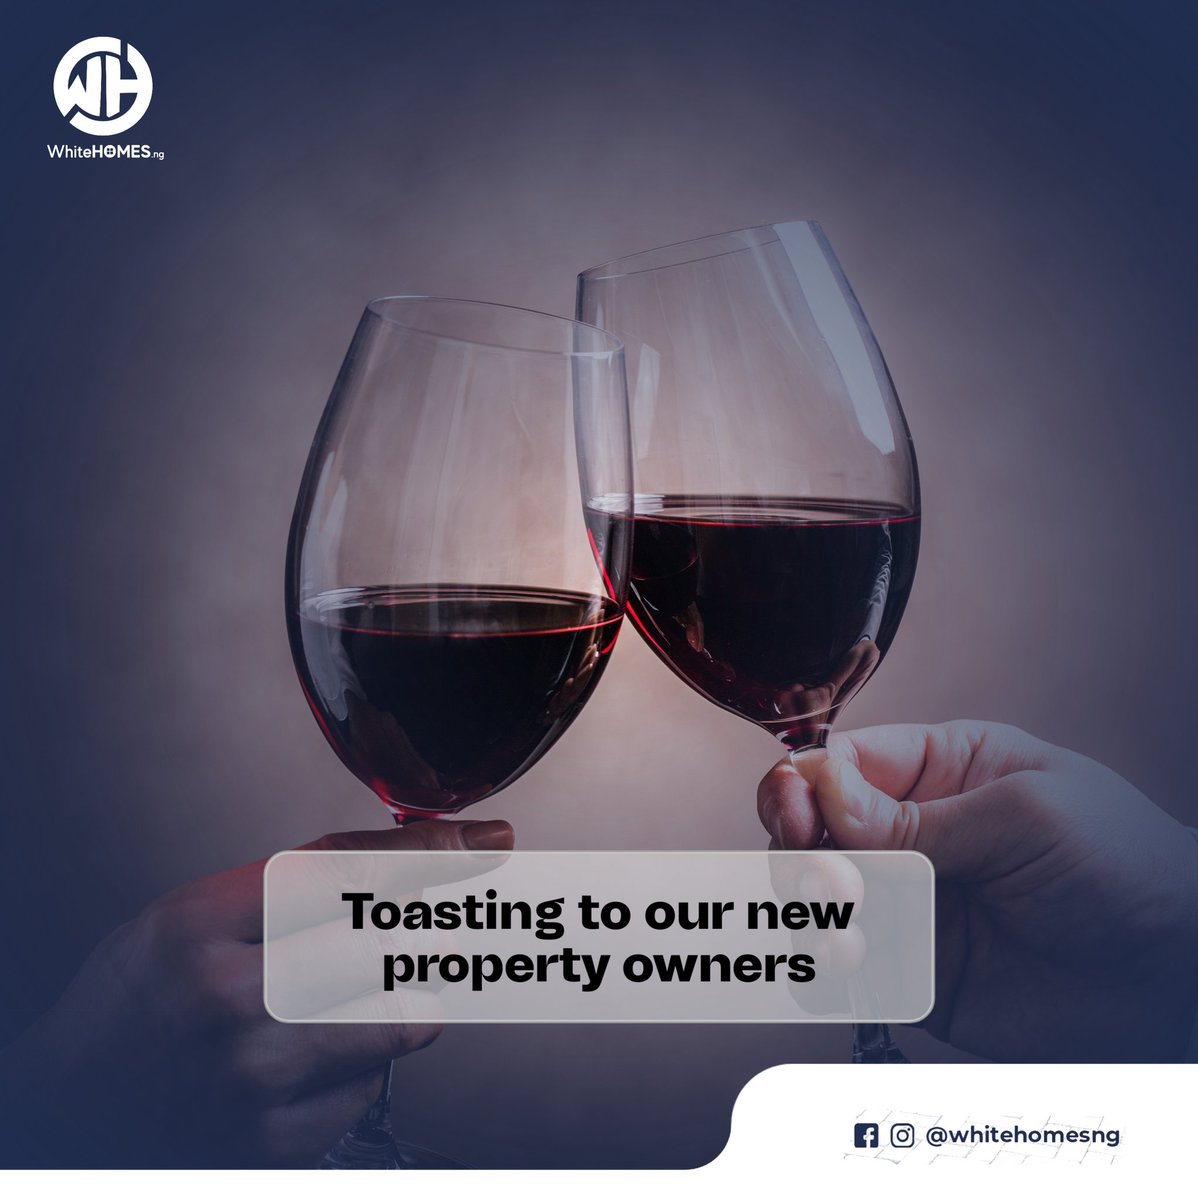 Let us raise a glass to you; begin your journey today. 

Call +2349082535398 or send us a message.

#whitehomesng 
#whitehouse
#luxuryliving
#whitehomesproperty
#whitehomes
#propertyowners
#beginyourjourney
#ownahouse 
#ownaproperty
#buywhitehomes 
#callus
#sendusaDM